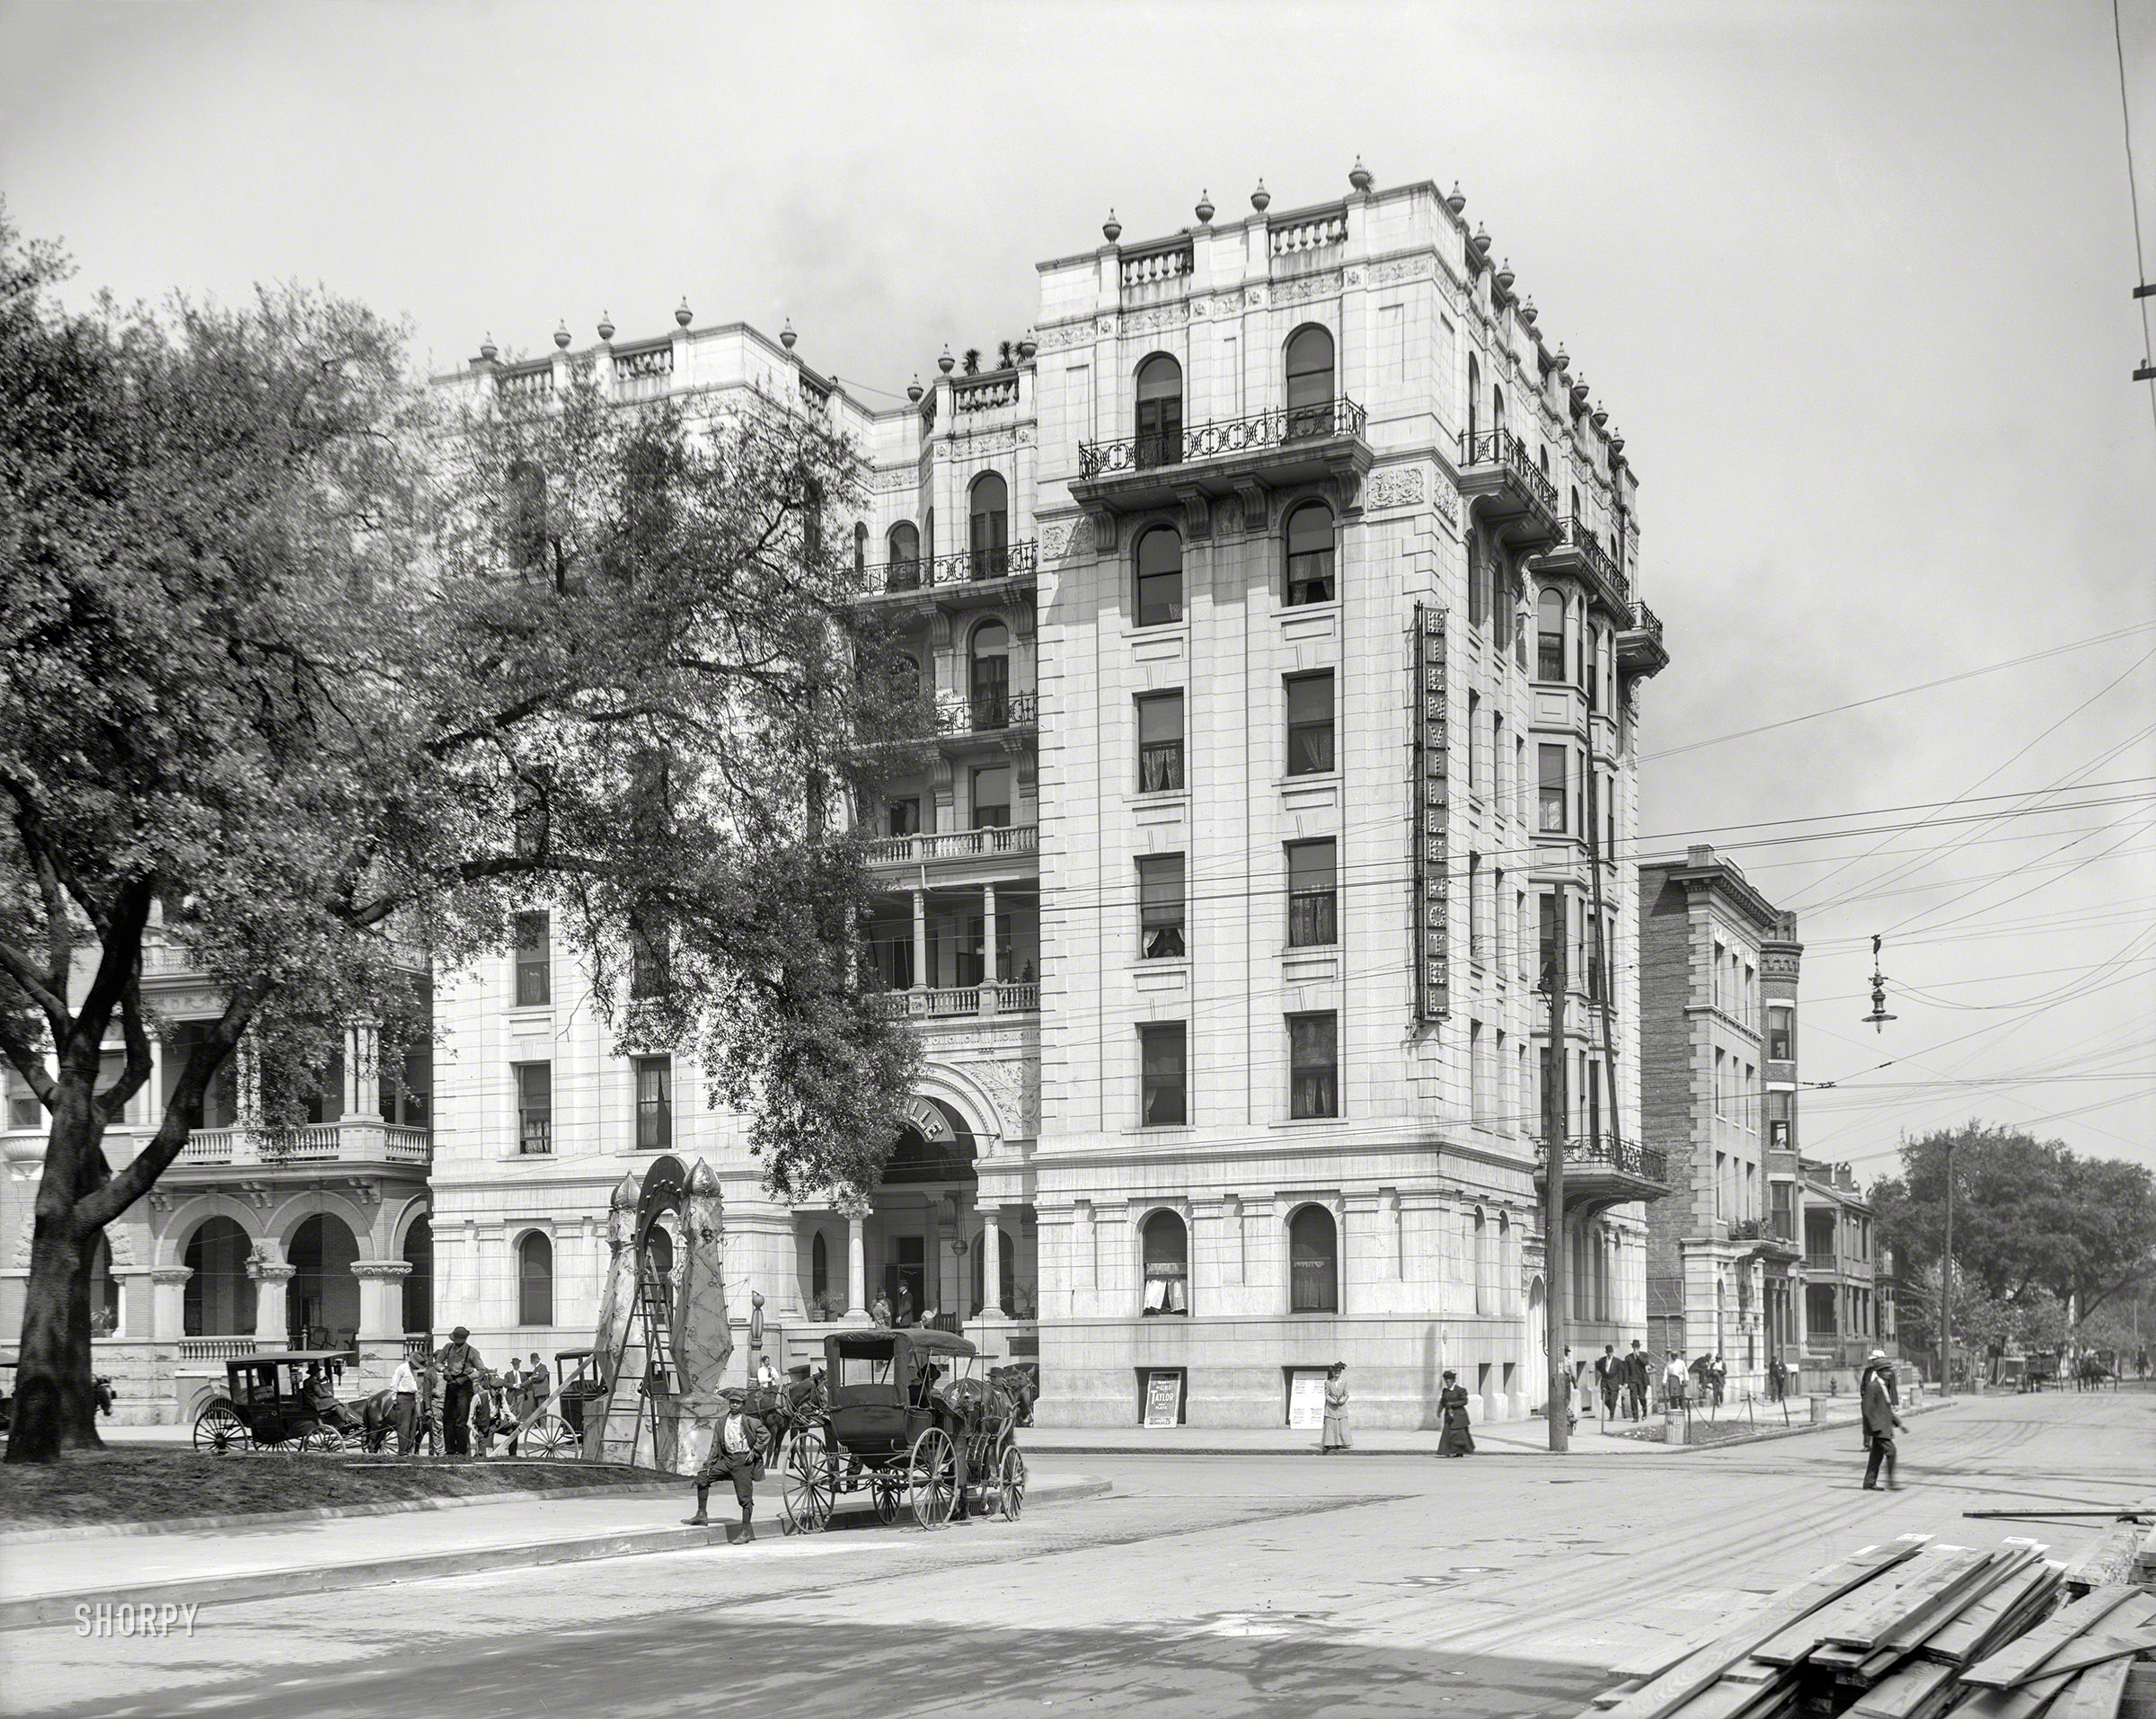 Mobile, Alabama, circa 1910. "Bienville Hotel, Bienville Square." 8x10 inch dry plate glass negative, Detroit Publishing Company. View full size.